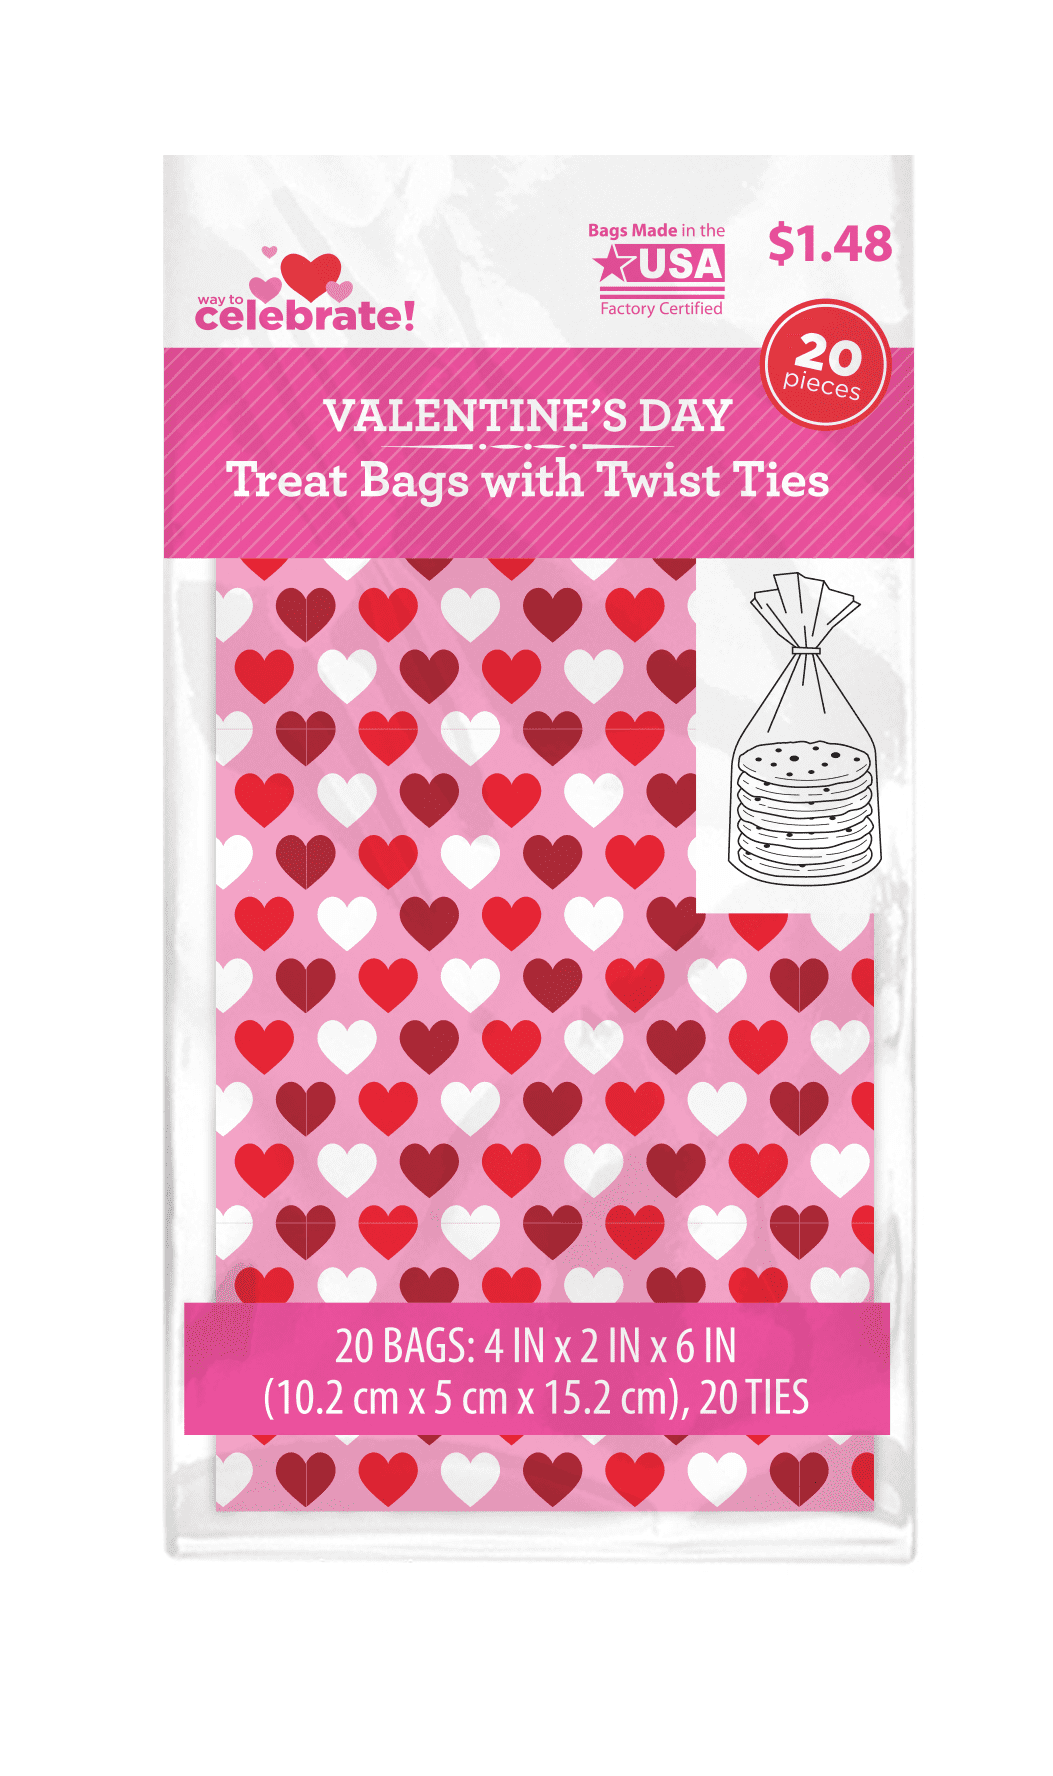 WAY TO CELEBRATE! Way to Celebrate 20ct Cello Valentines Mini Treat Bags 4"x6" with 20 White Twist Ties- Sweethearts